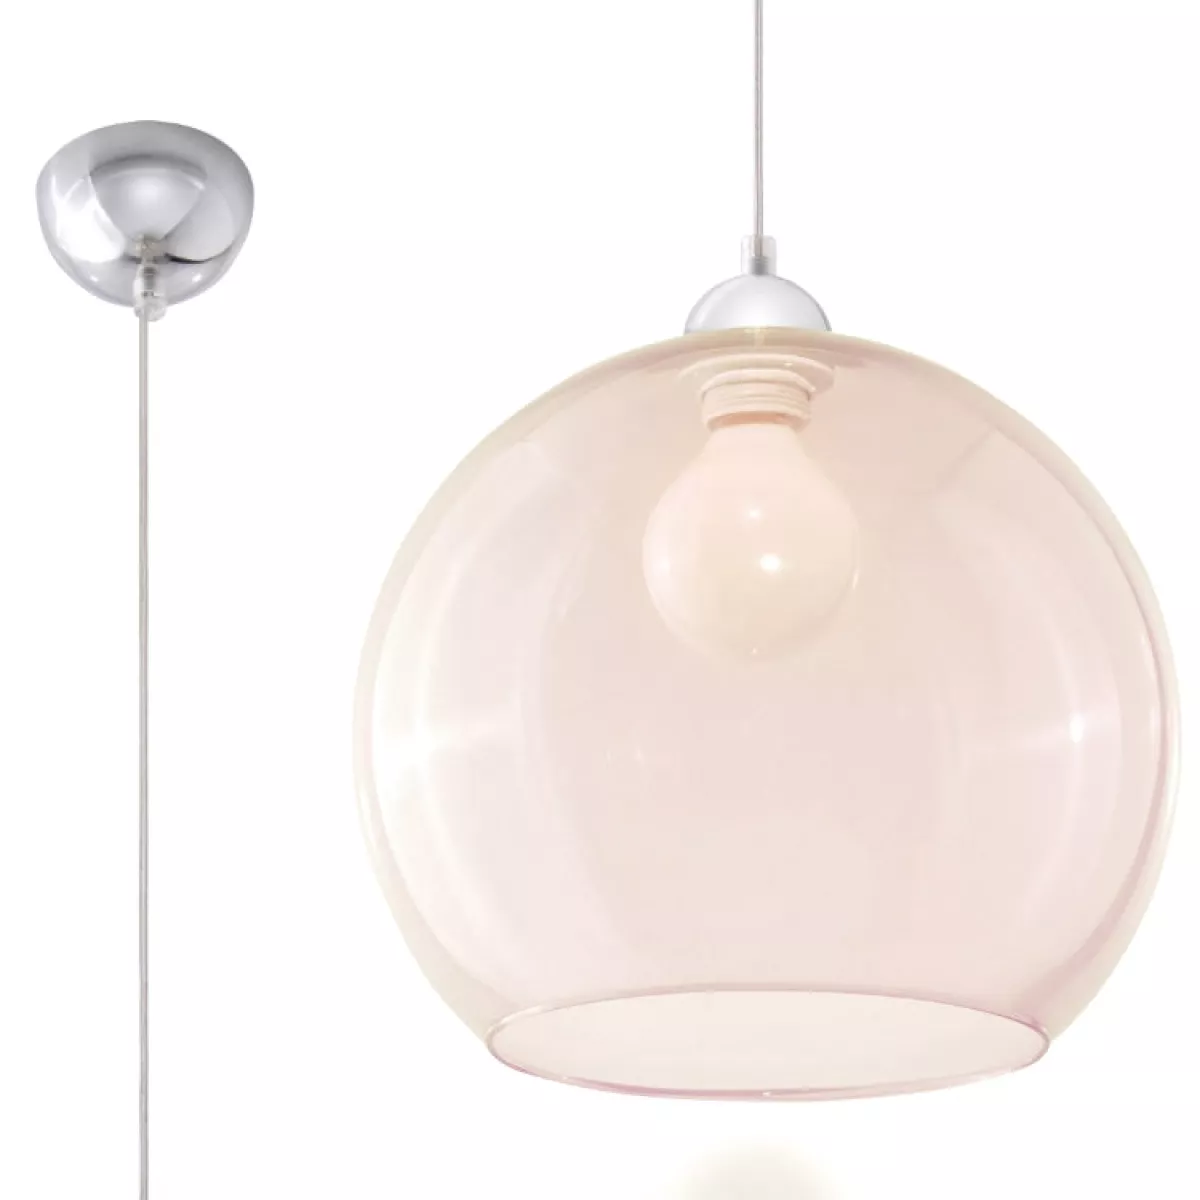 #1 - Vedhæng lampe BALL champagne